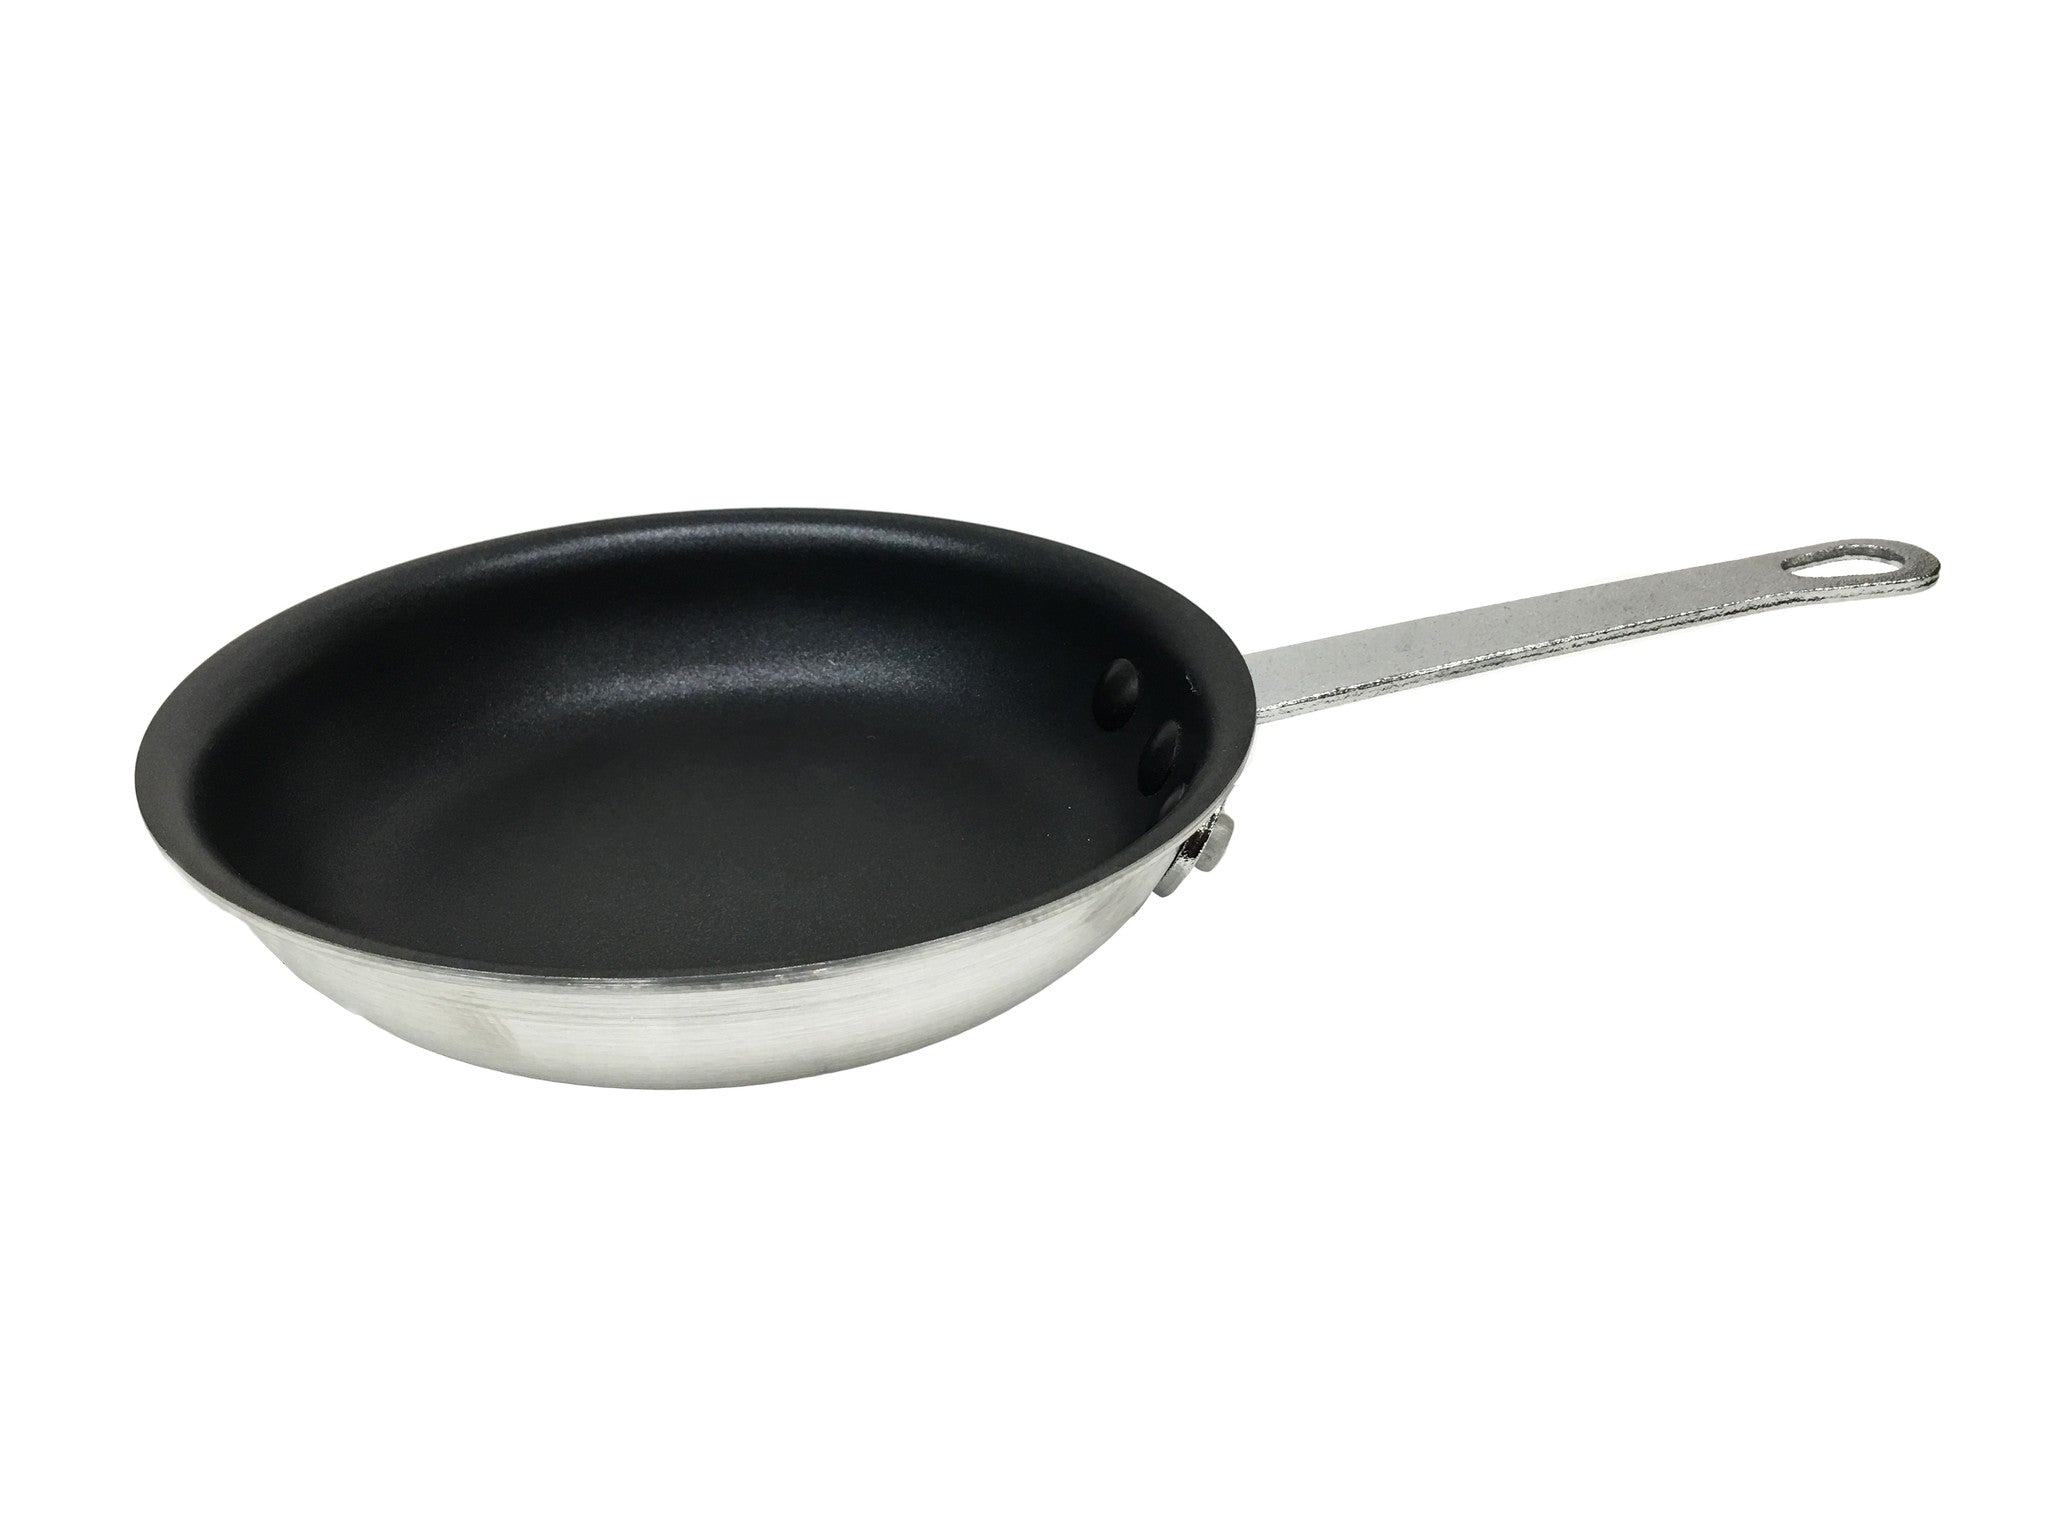 Alegacy Optima ll 21CT Stainless Steel Fry Pan with Helper Handle